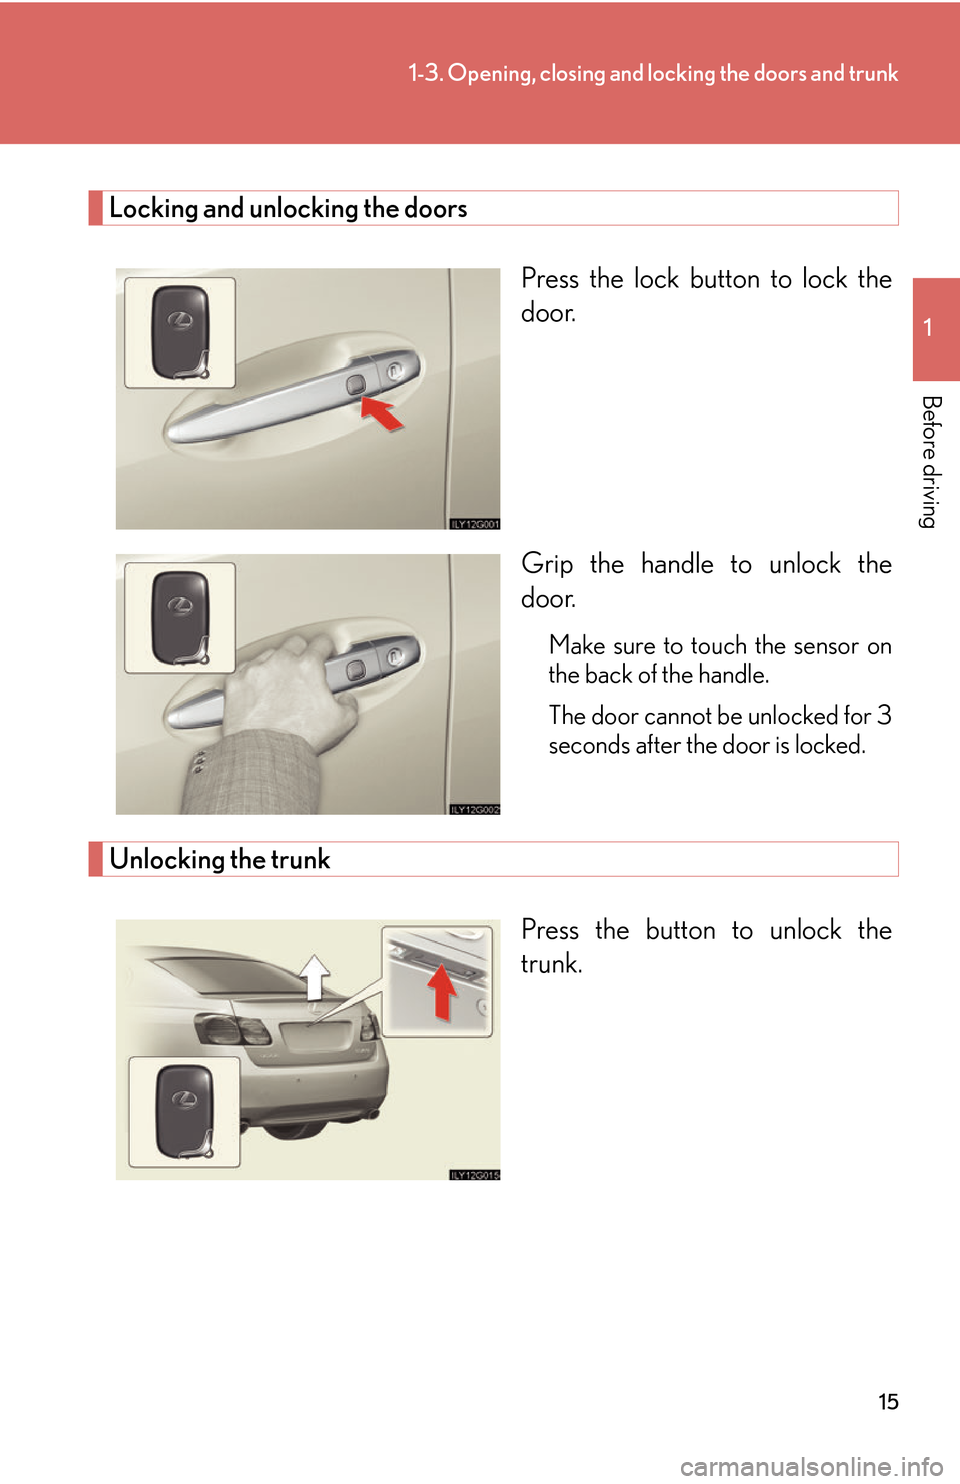 Lexus GS450h 2007  Scheduled Maintenance Guide / LEXUS 2007 GS450H THROUGH JUNE 2006 PROD. OWNERS MANUAL (OM30727U) 15
1-3. Opening, closing and locking the doors and trunk
1
Before driving
Locking and unlocking the doors
Press the lock button to lock the 
door.
Grip the handle to unlock the 
door
.
Make sure to to